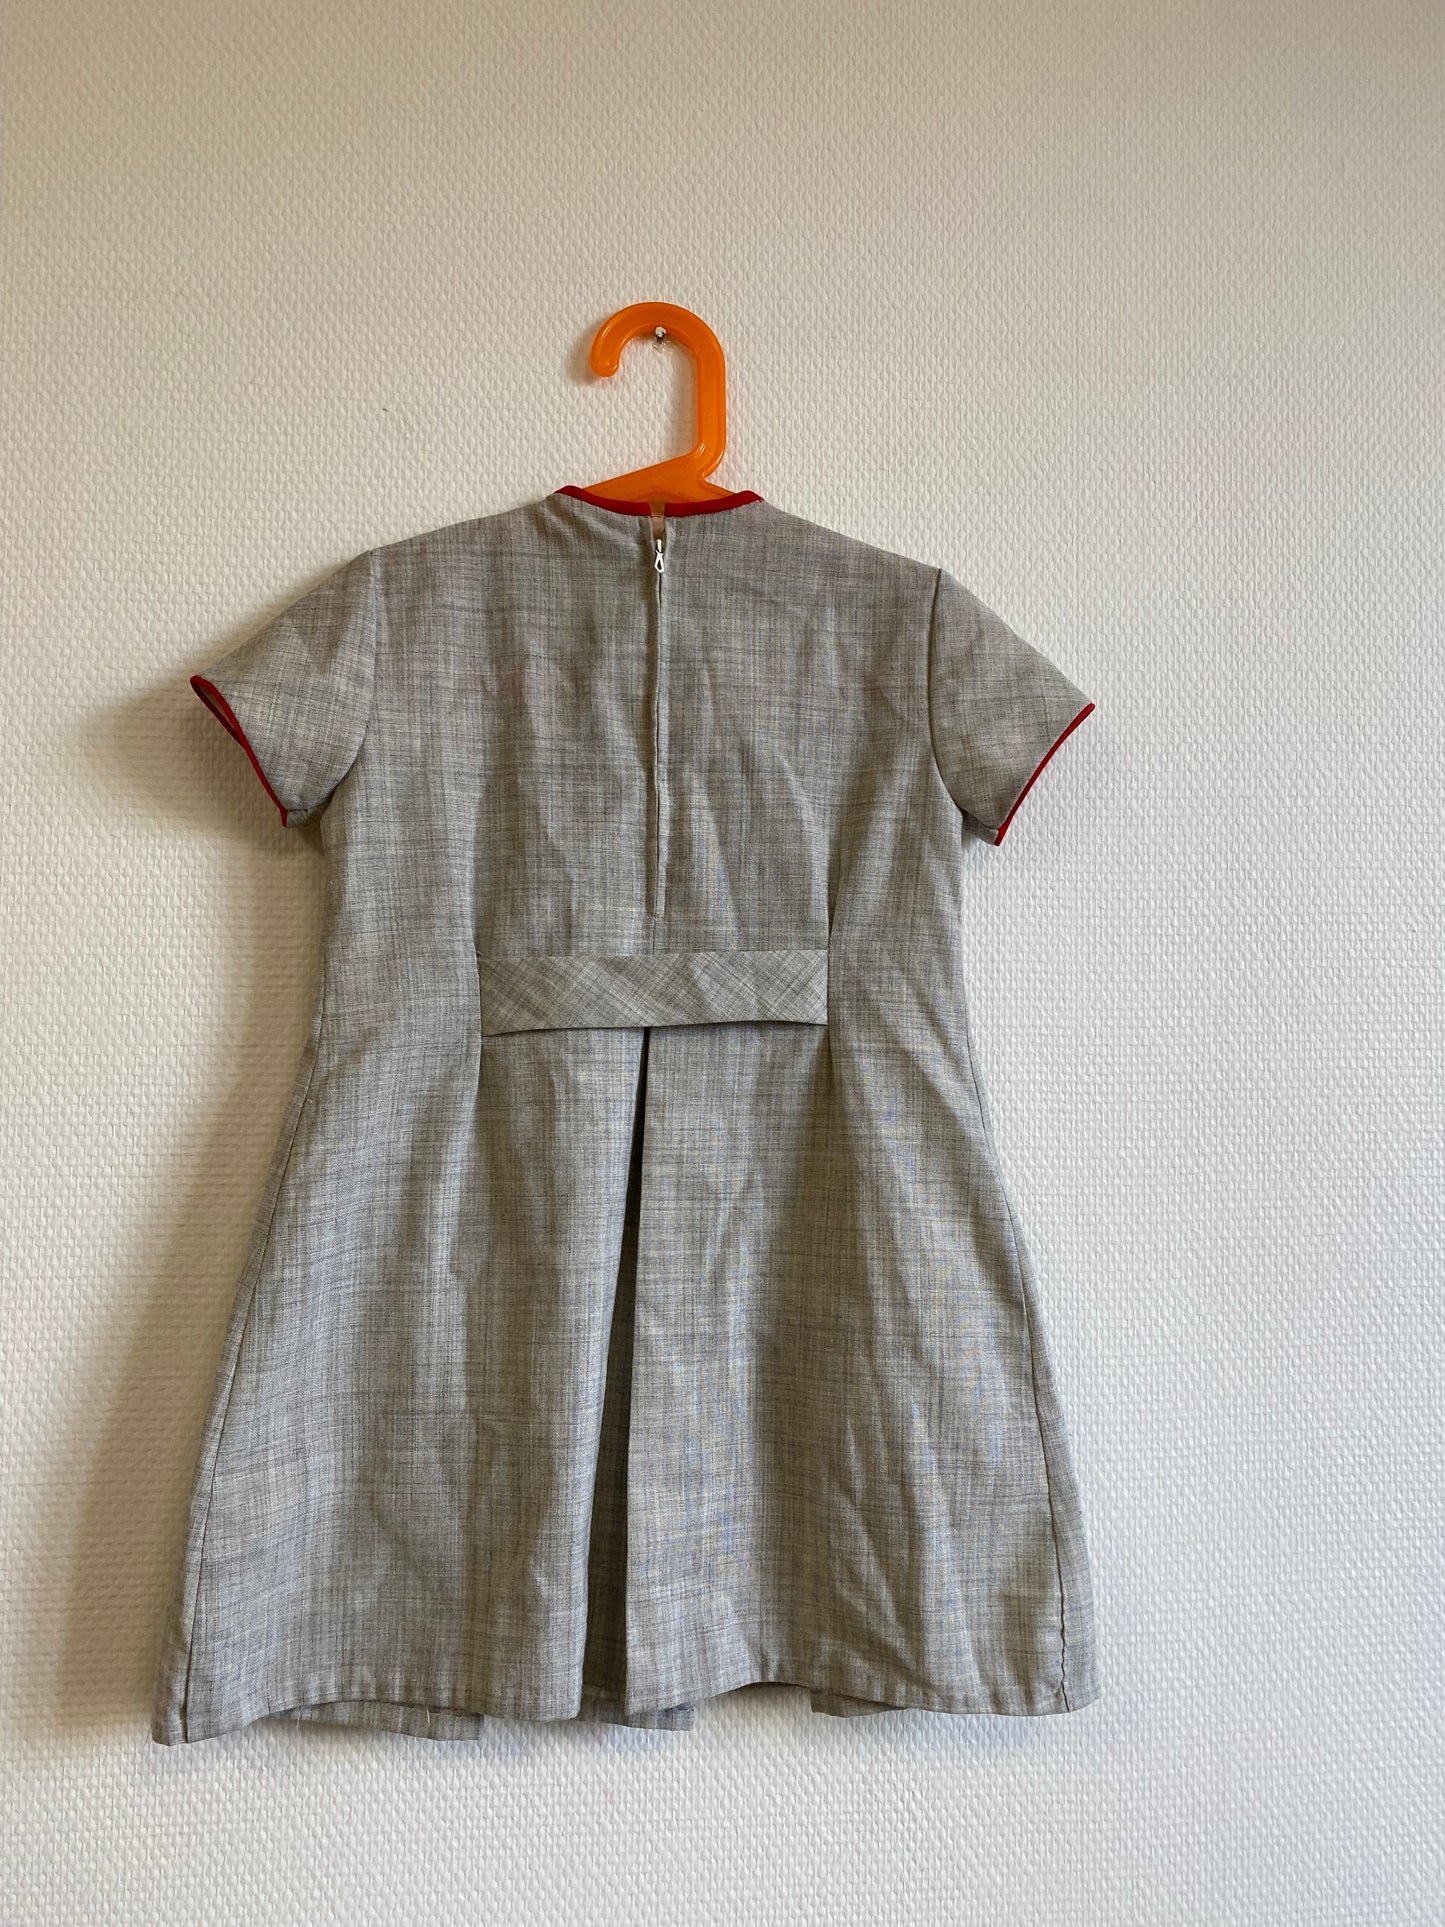 Robe grise 60s